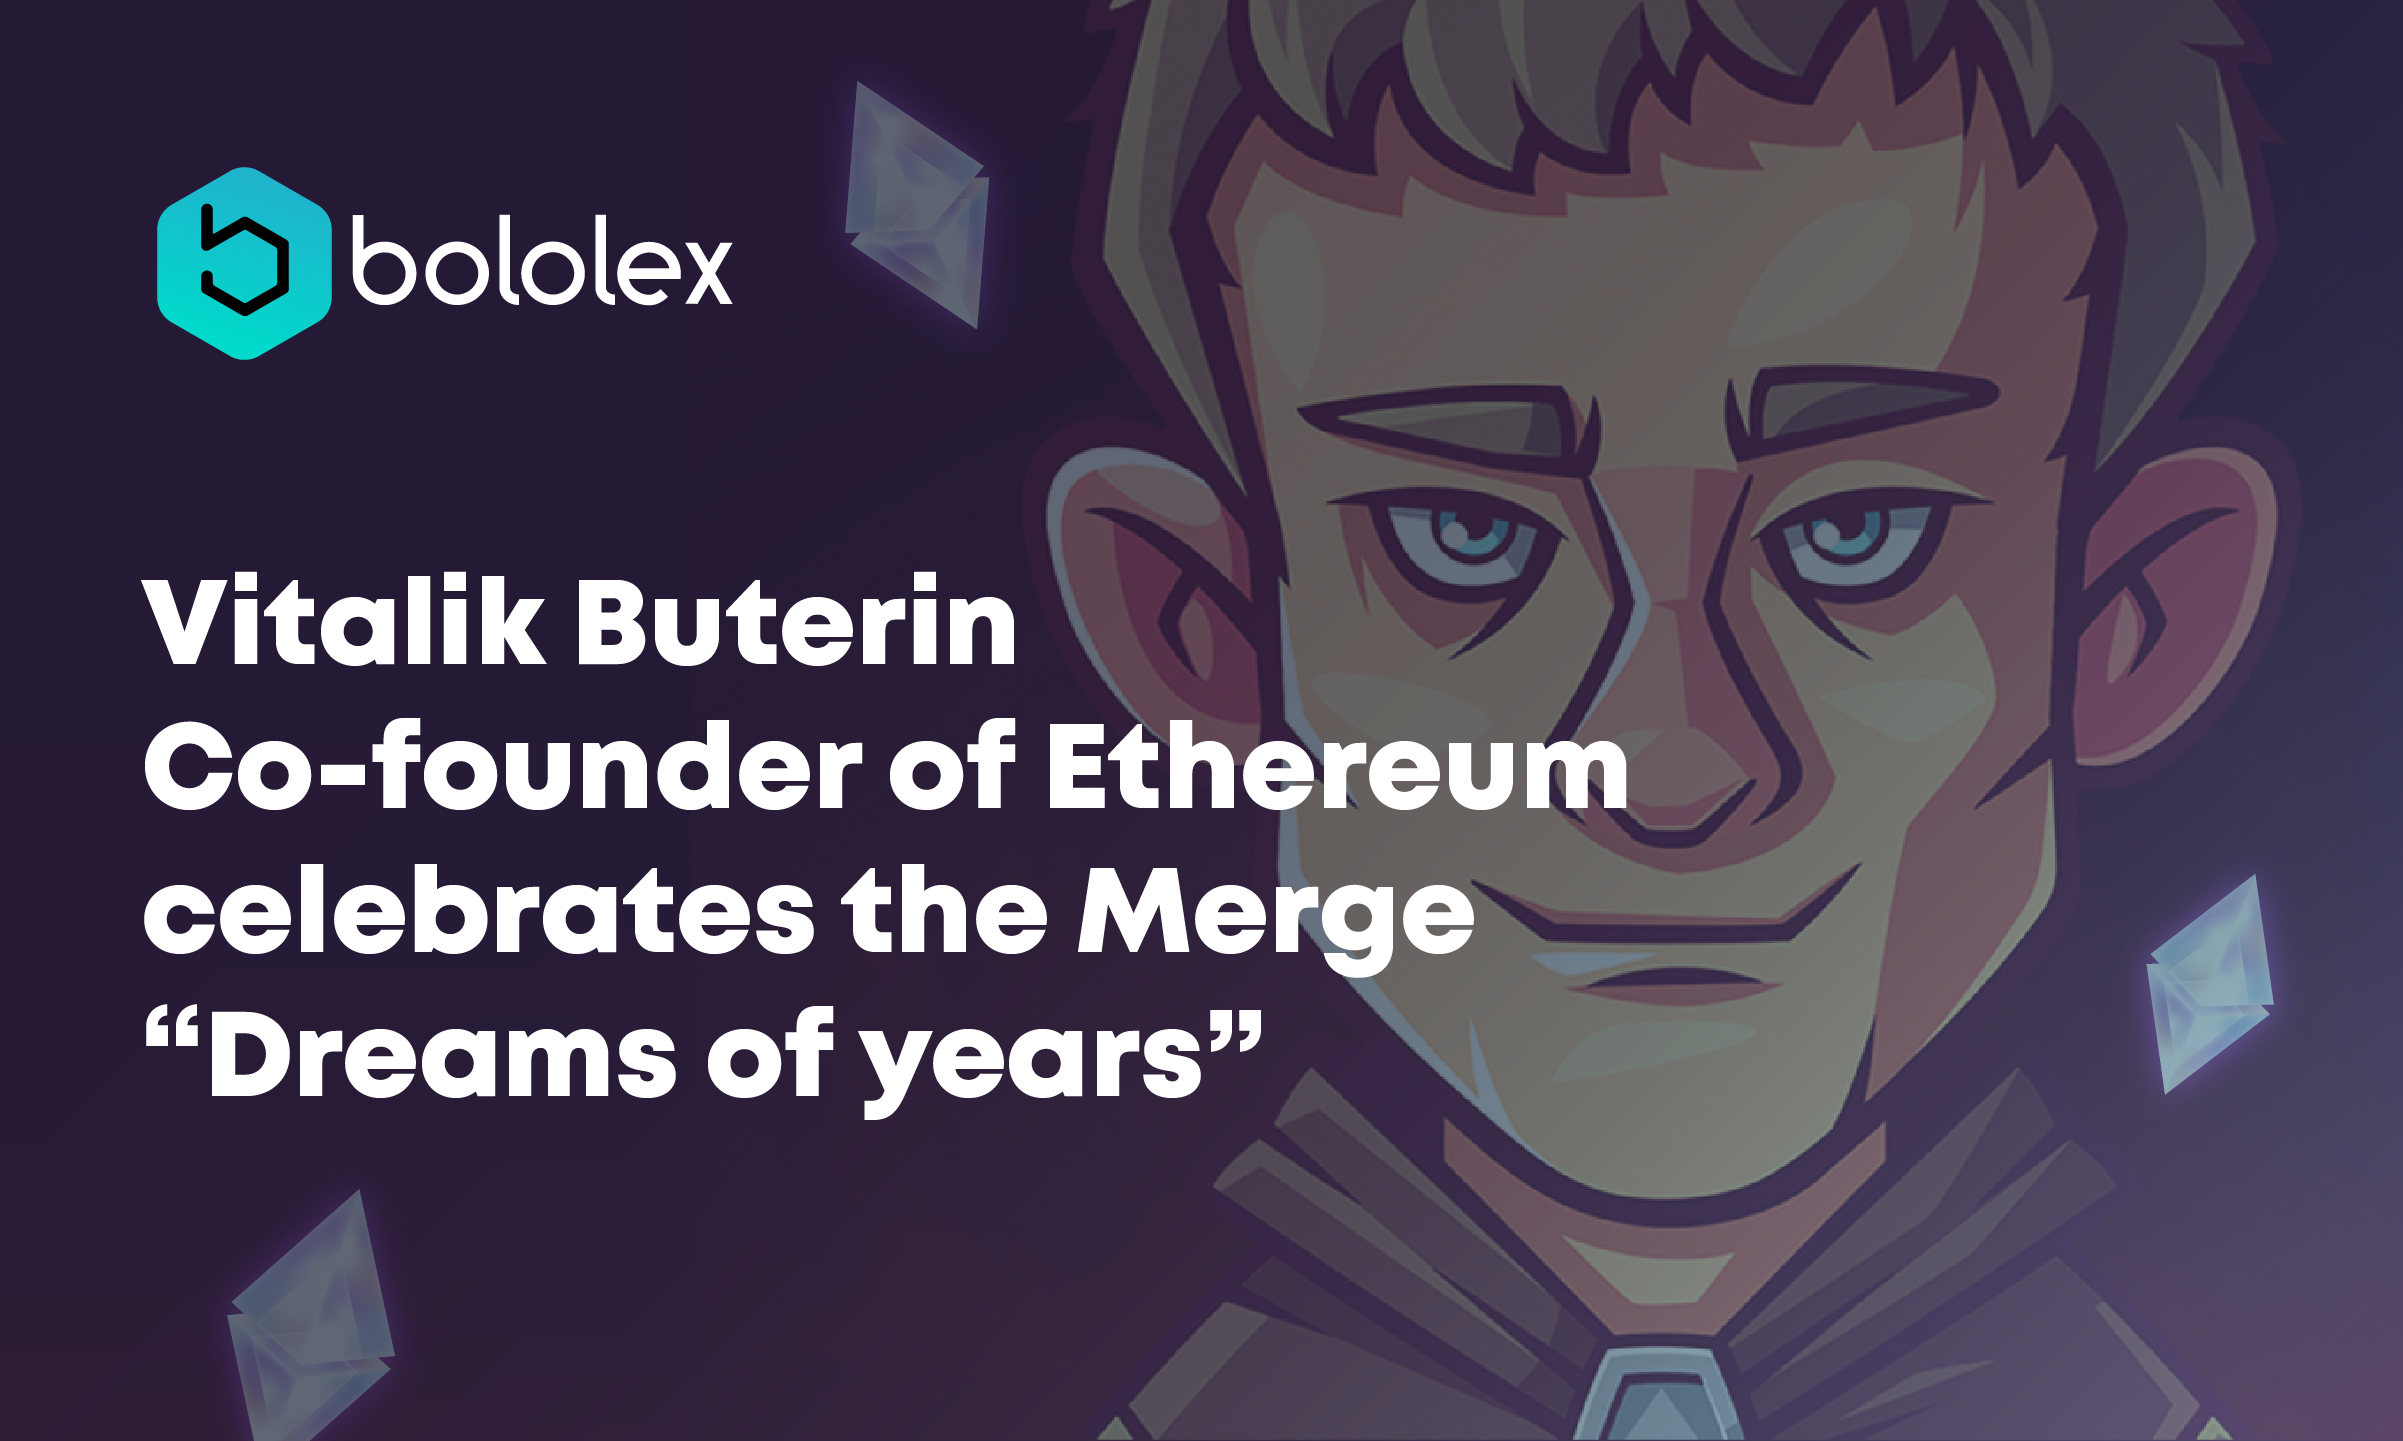 Vitalik Buterin Co-founder of Ethereum celebrates the Merge “Dreams of years”